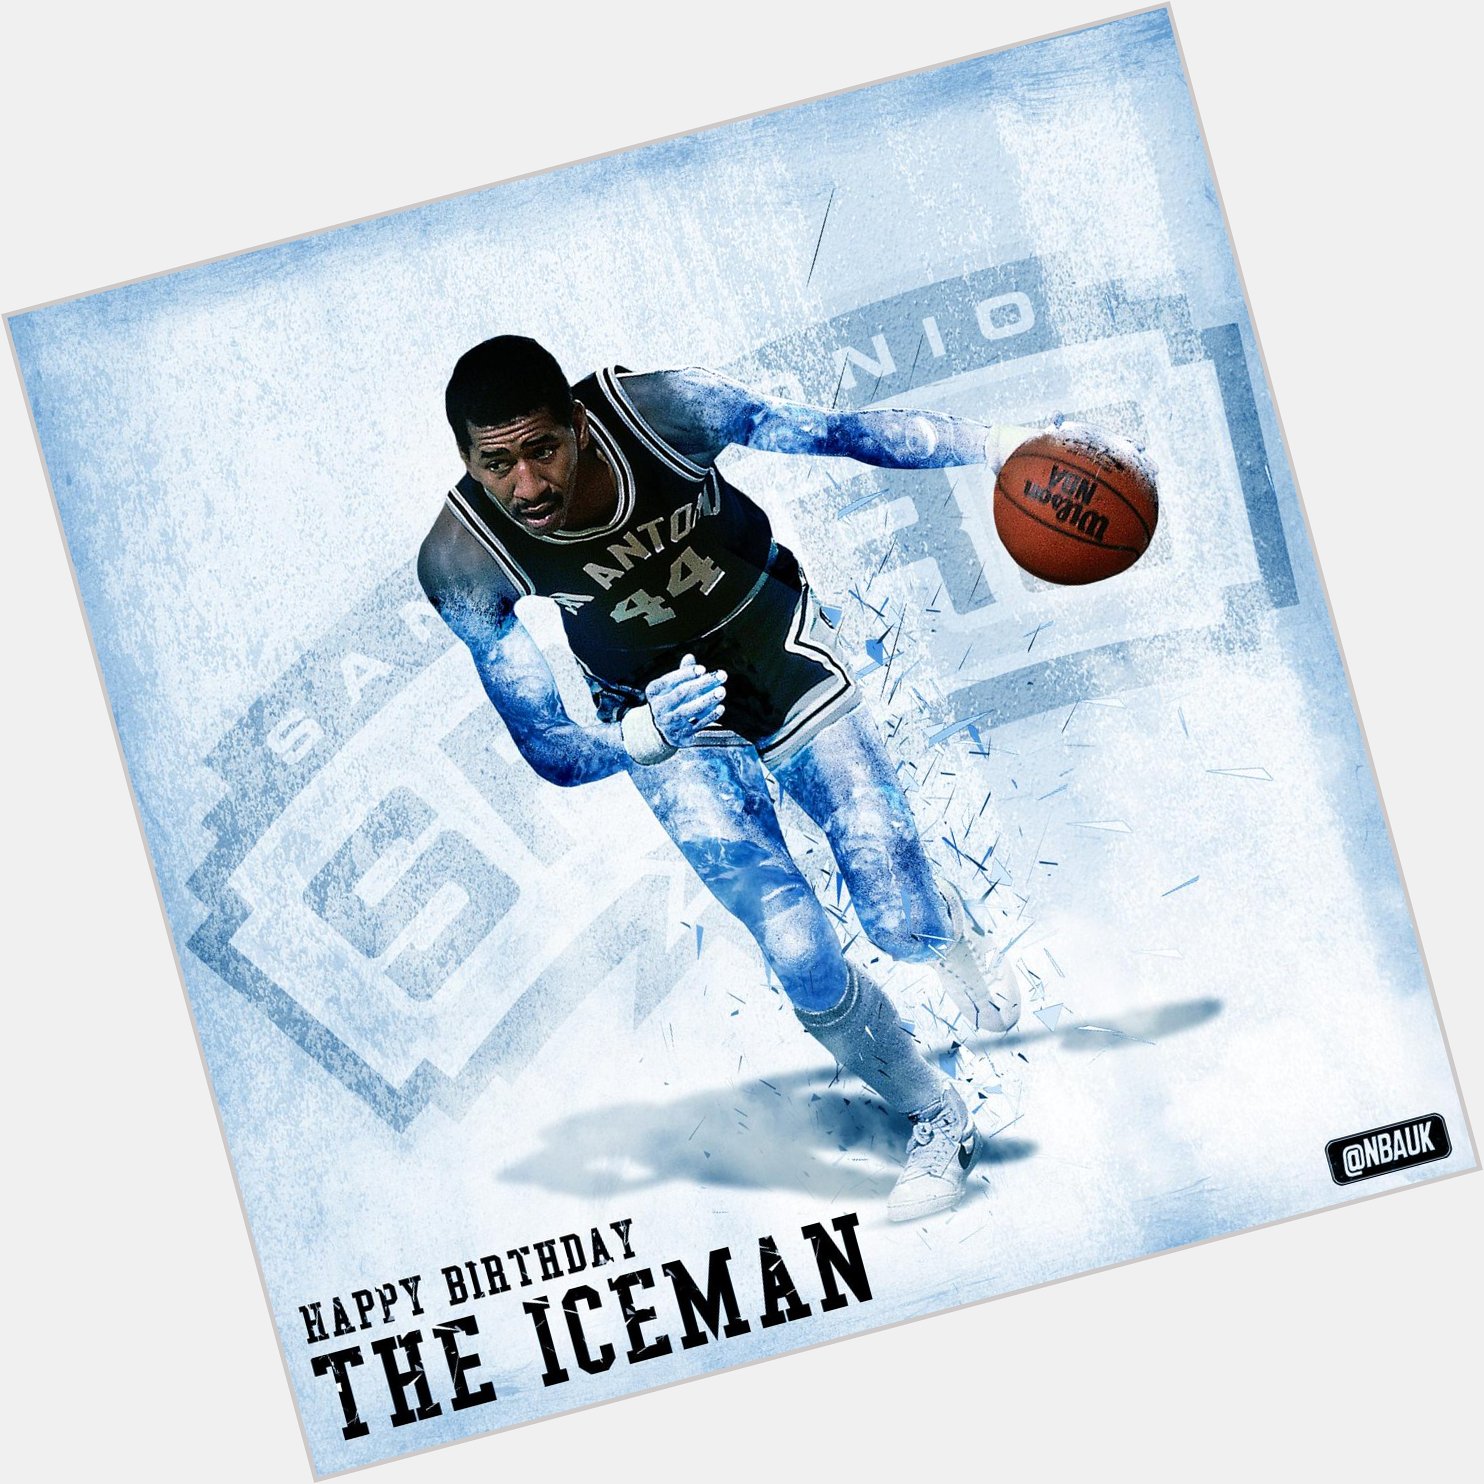 Absolute star. Master of...The Finger Roll. Happy birthday to The Iceman George Gervin! 